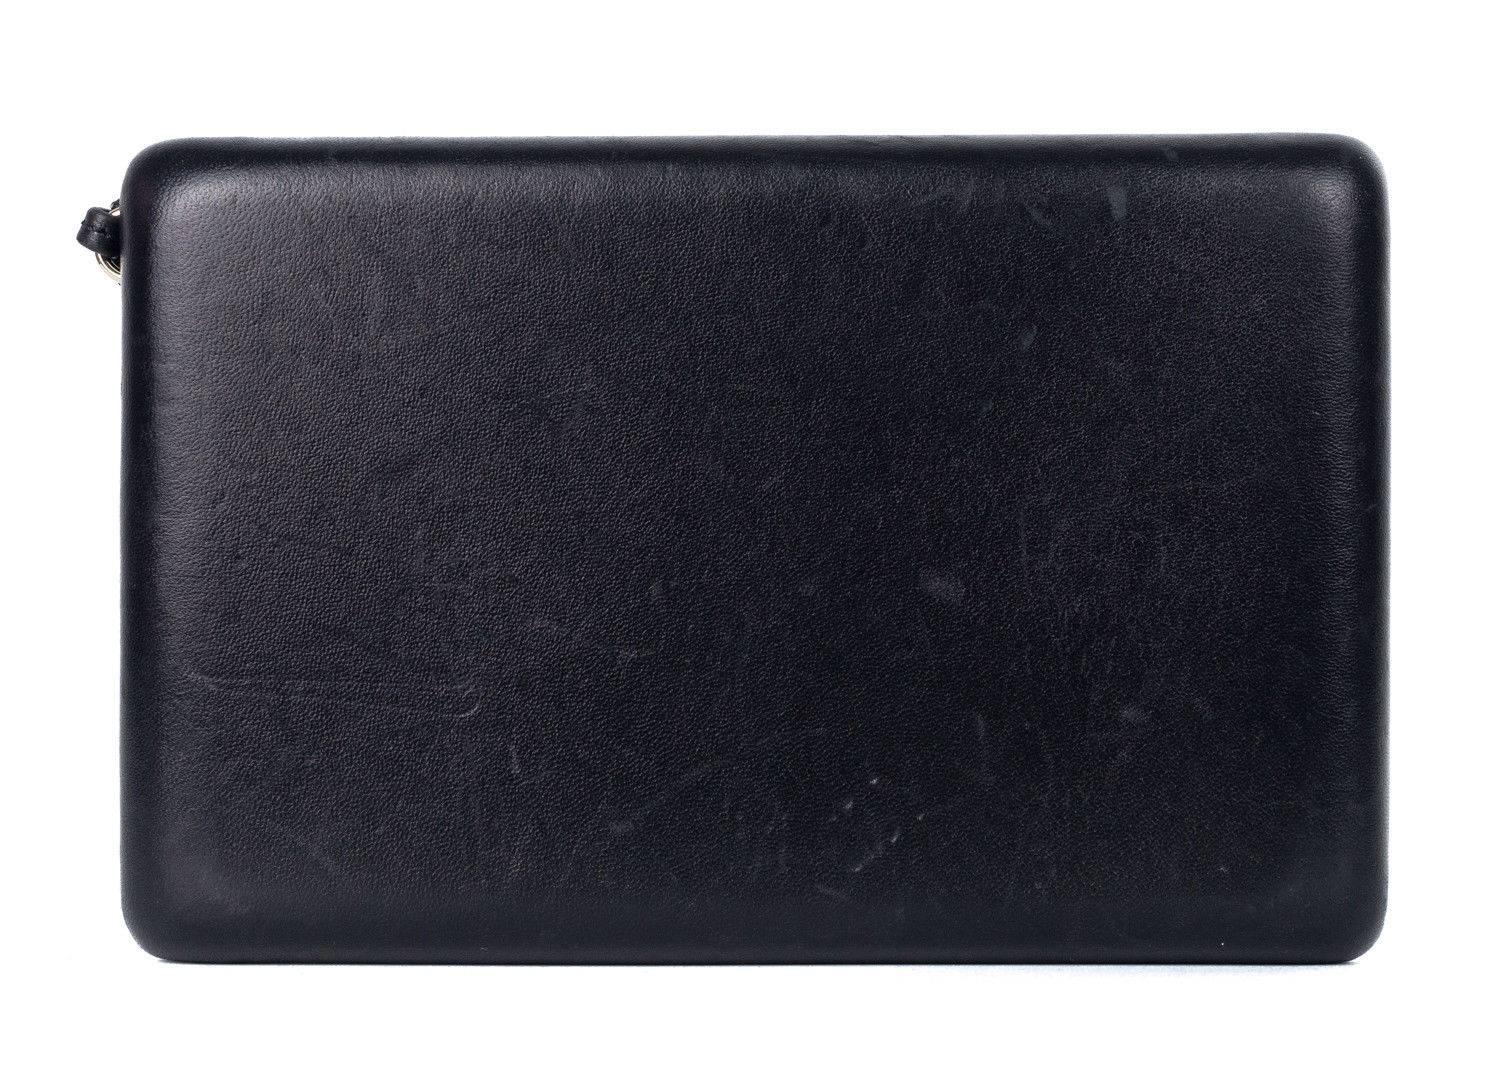 Roberto Cavalli black leather clutch bag. This clutch bag features a solid black leather with a contrasting gold tone hardware a horse ornament with long fringes attached. This clutch can be worn as a day wear bag or night wear. Perfect for any